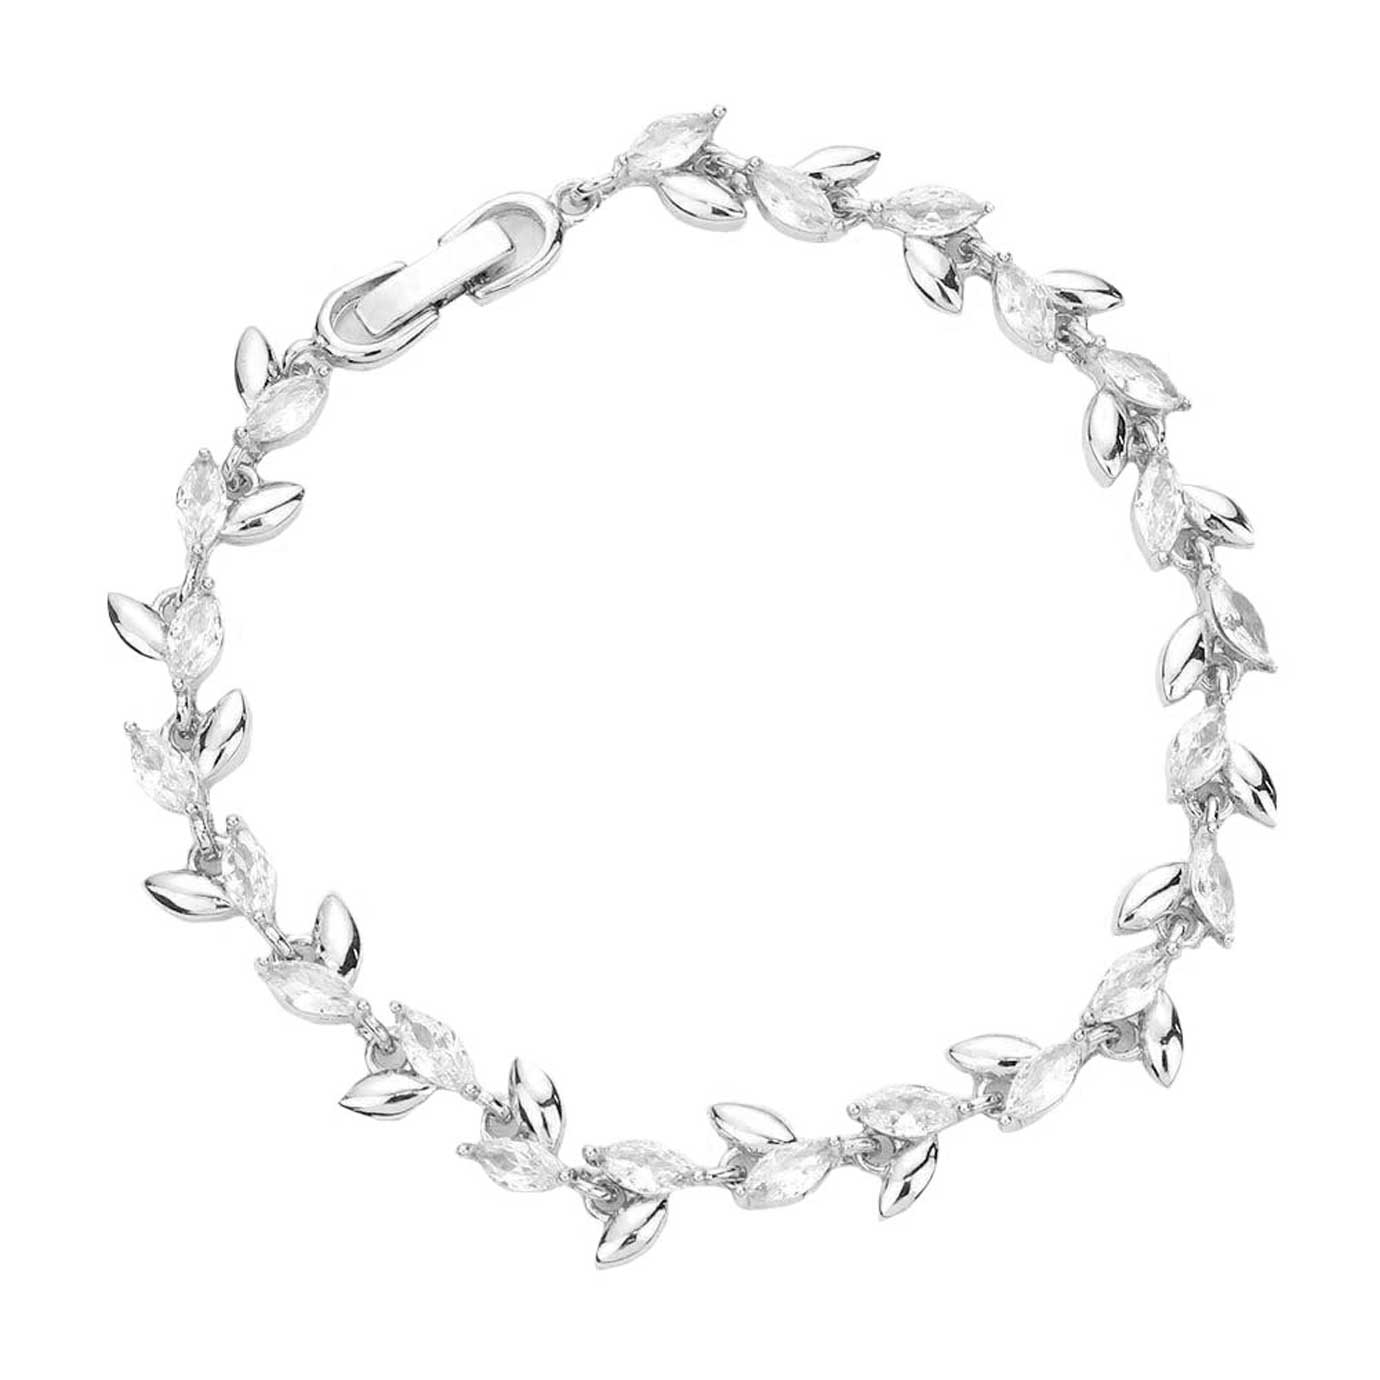 Silver CZ Metal Marquise Link Evening Bracelet. These Metal bracelets are easy to put on, take off and so comfortable for daily wear. Pair these with tee and jeans and you are good to go. It will be your new favorite go-to accessory. Perfect Birthday gift, friendship day, Mother's Day, Graduation Gift.